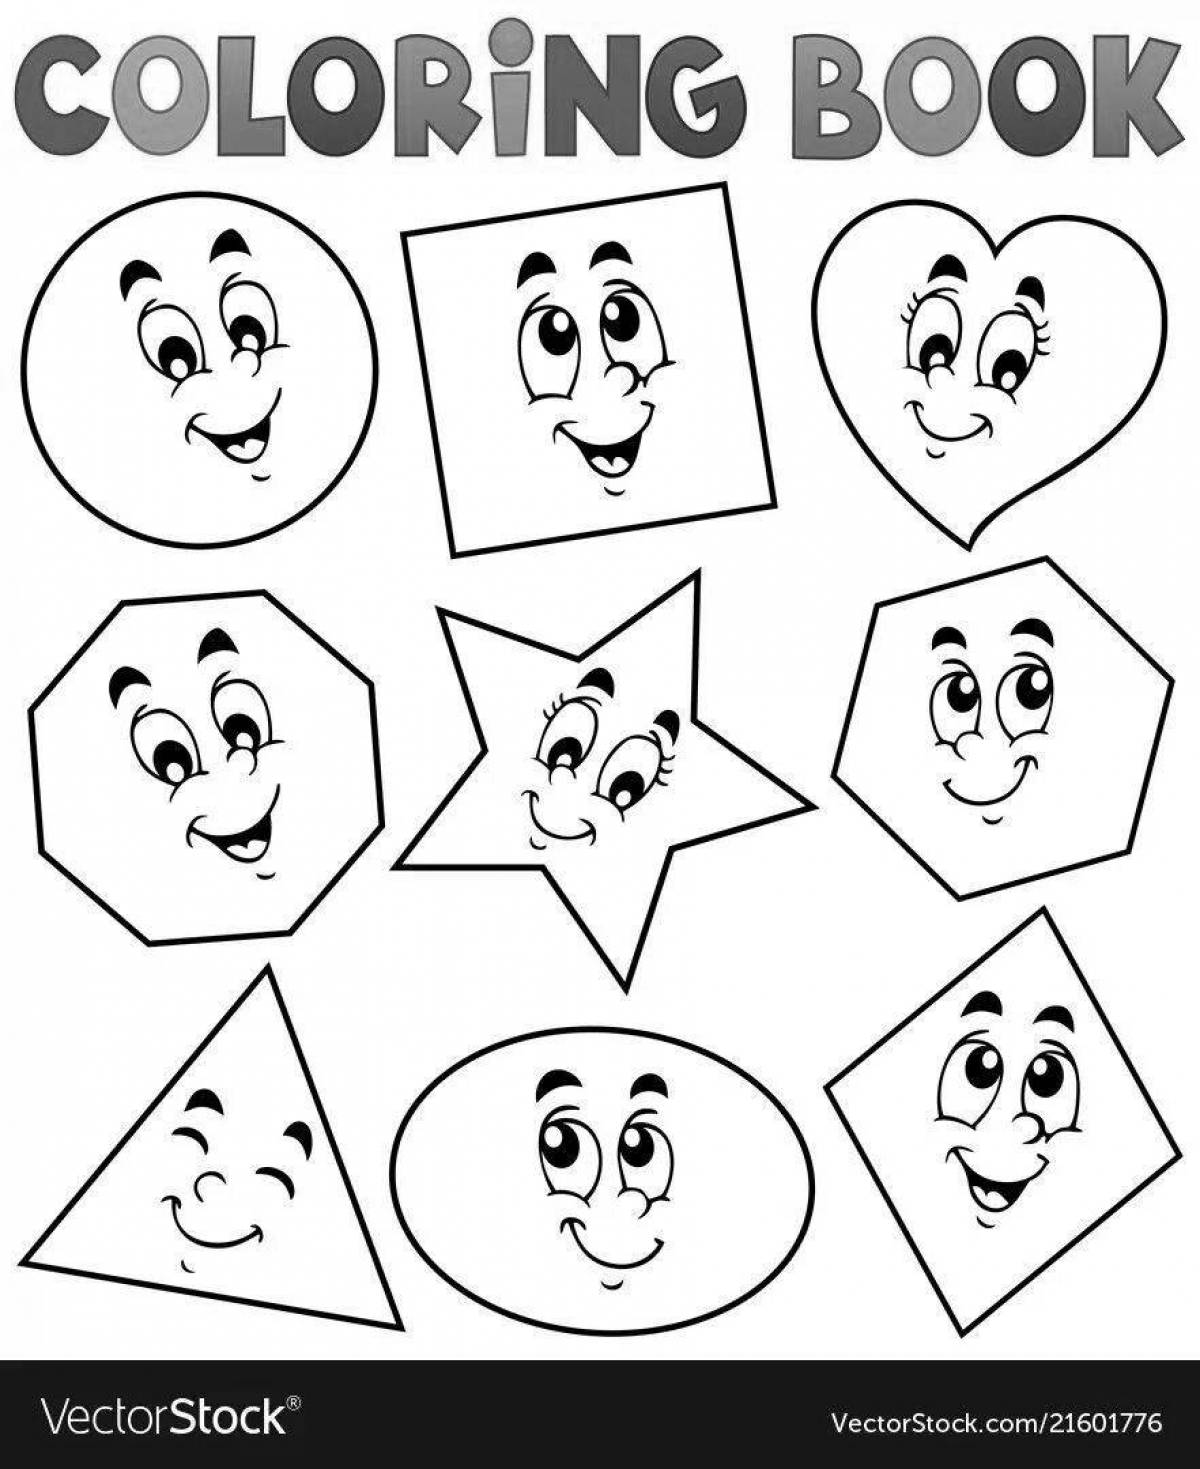 Colourful coloring pages for groups